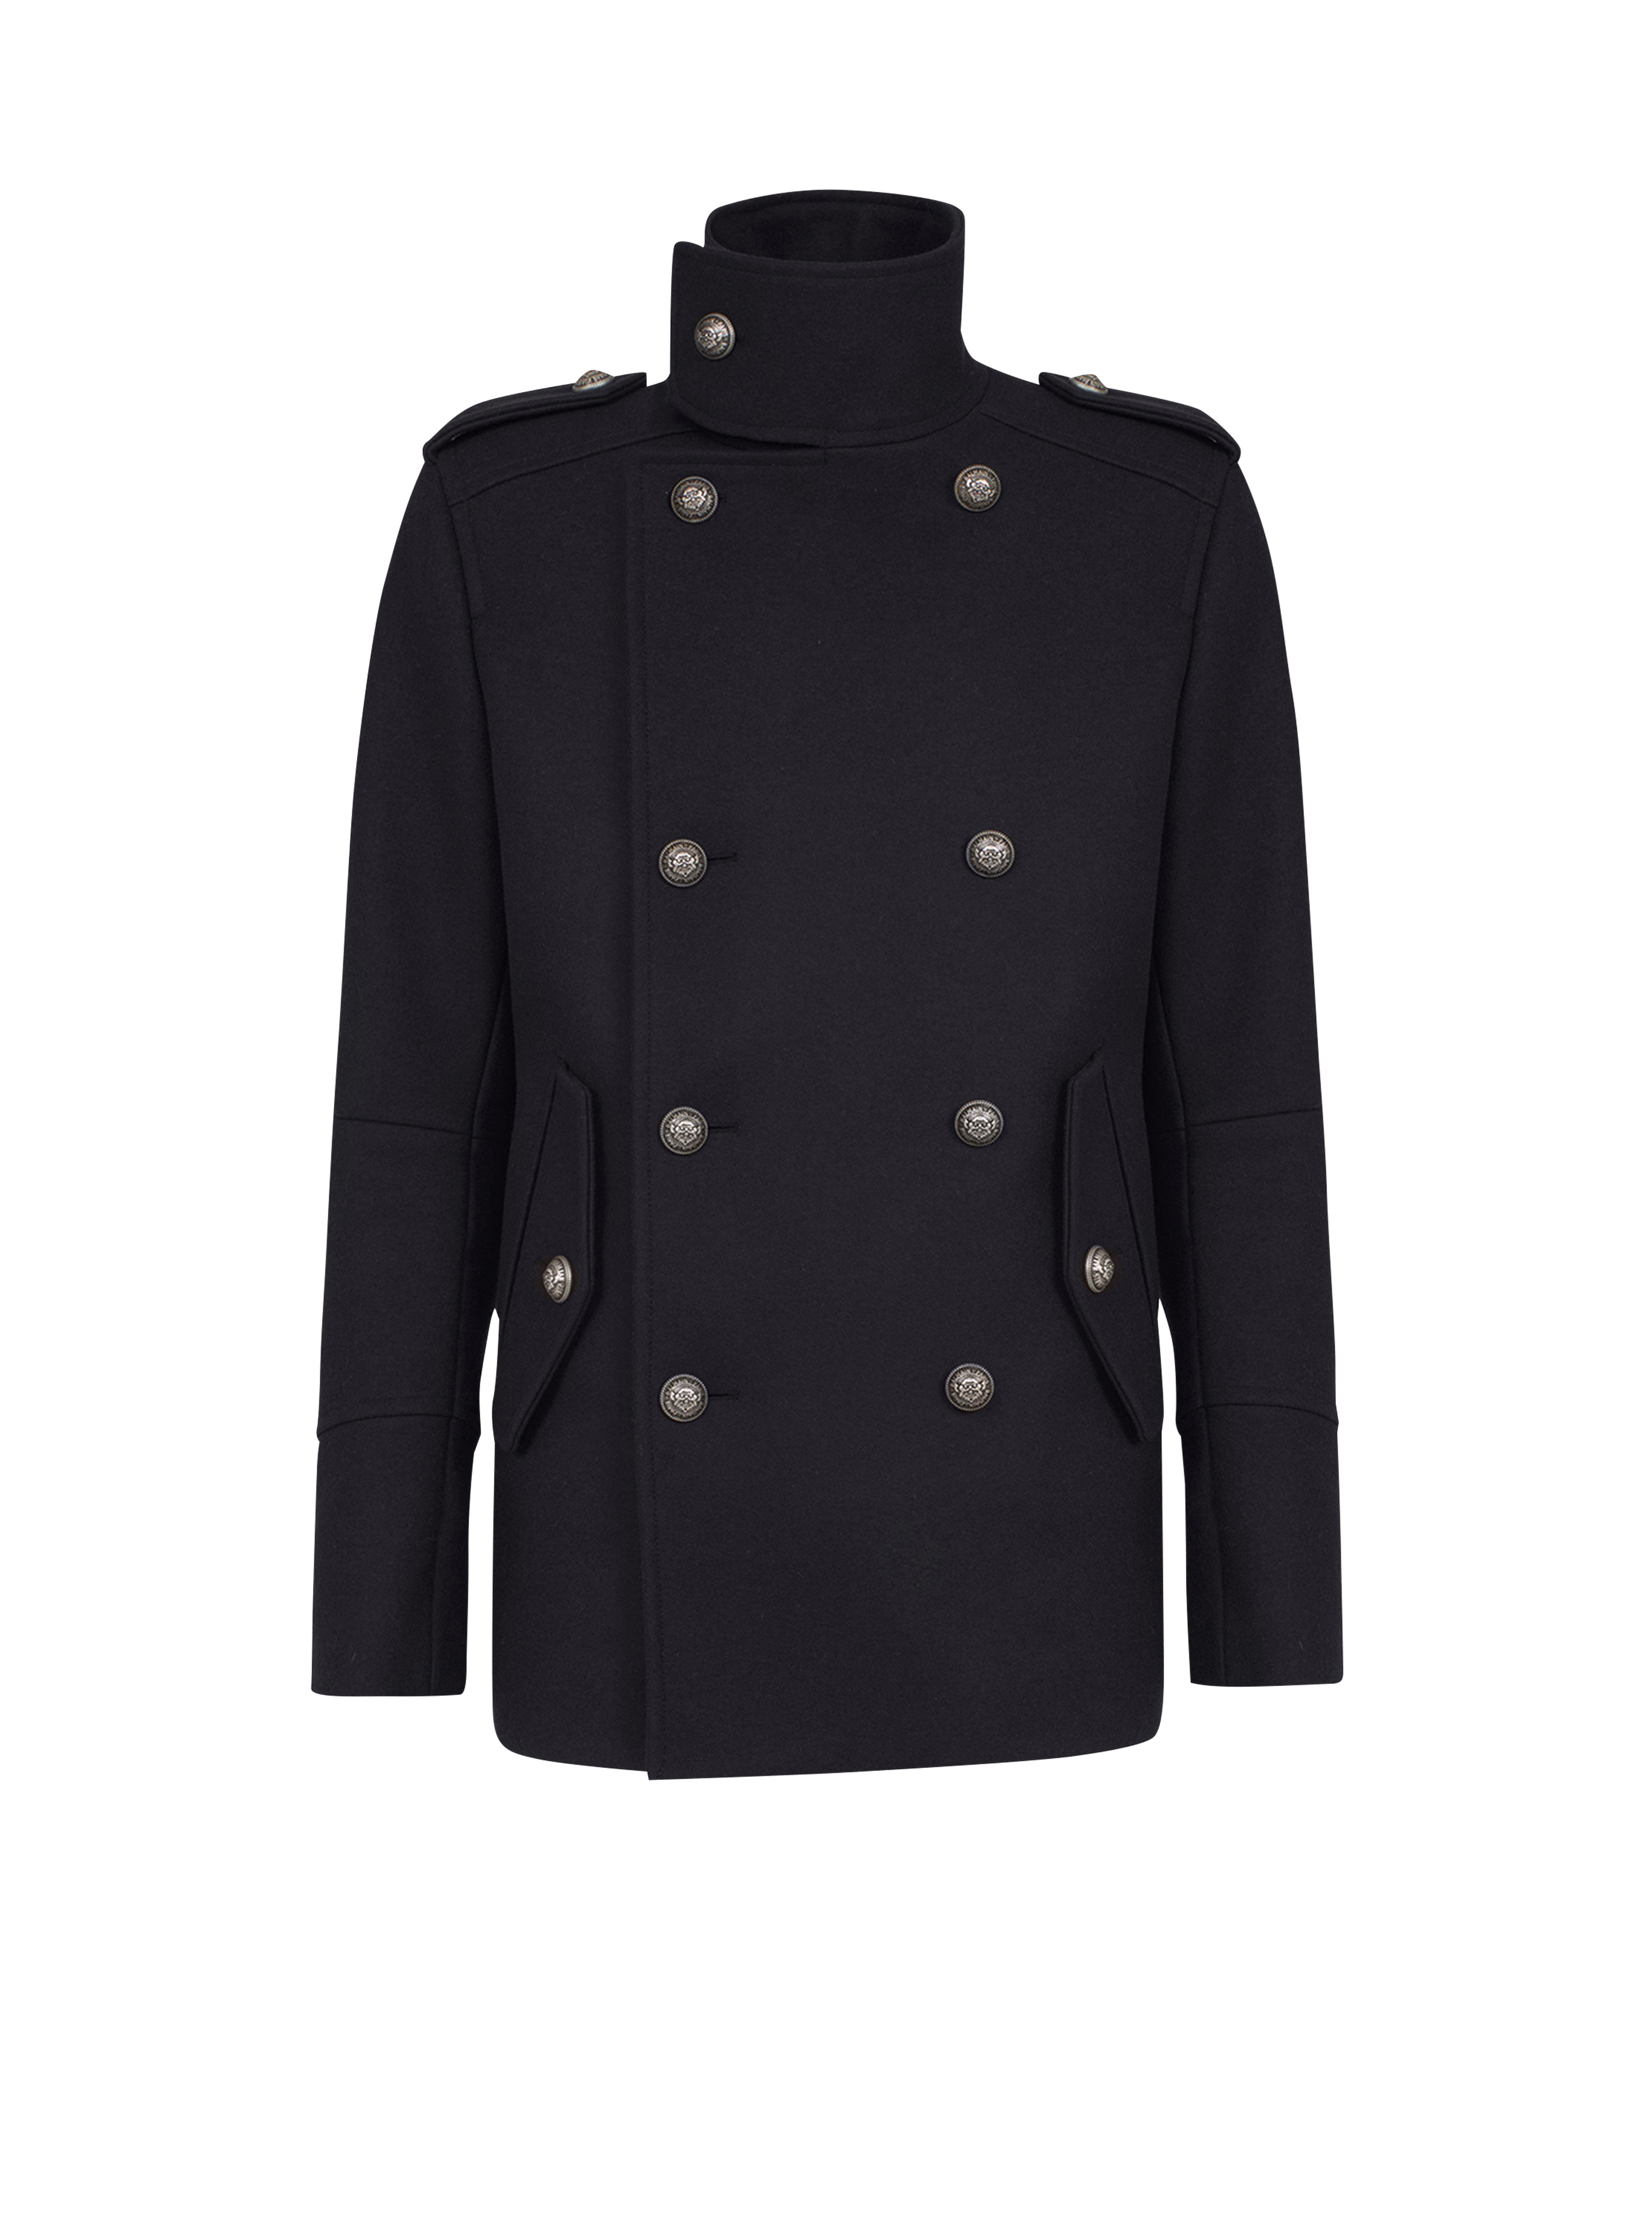 Wool military pea coat with double-breasted silver-tone buttoned fastening, black